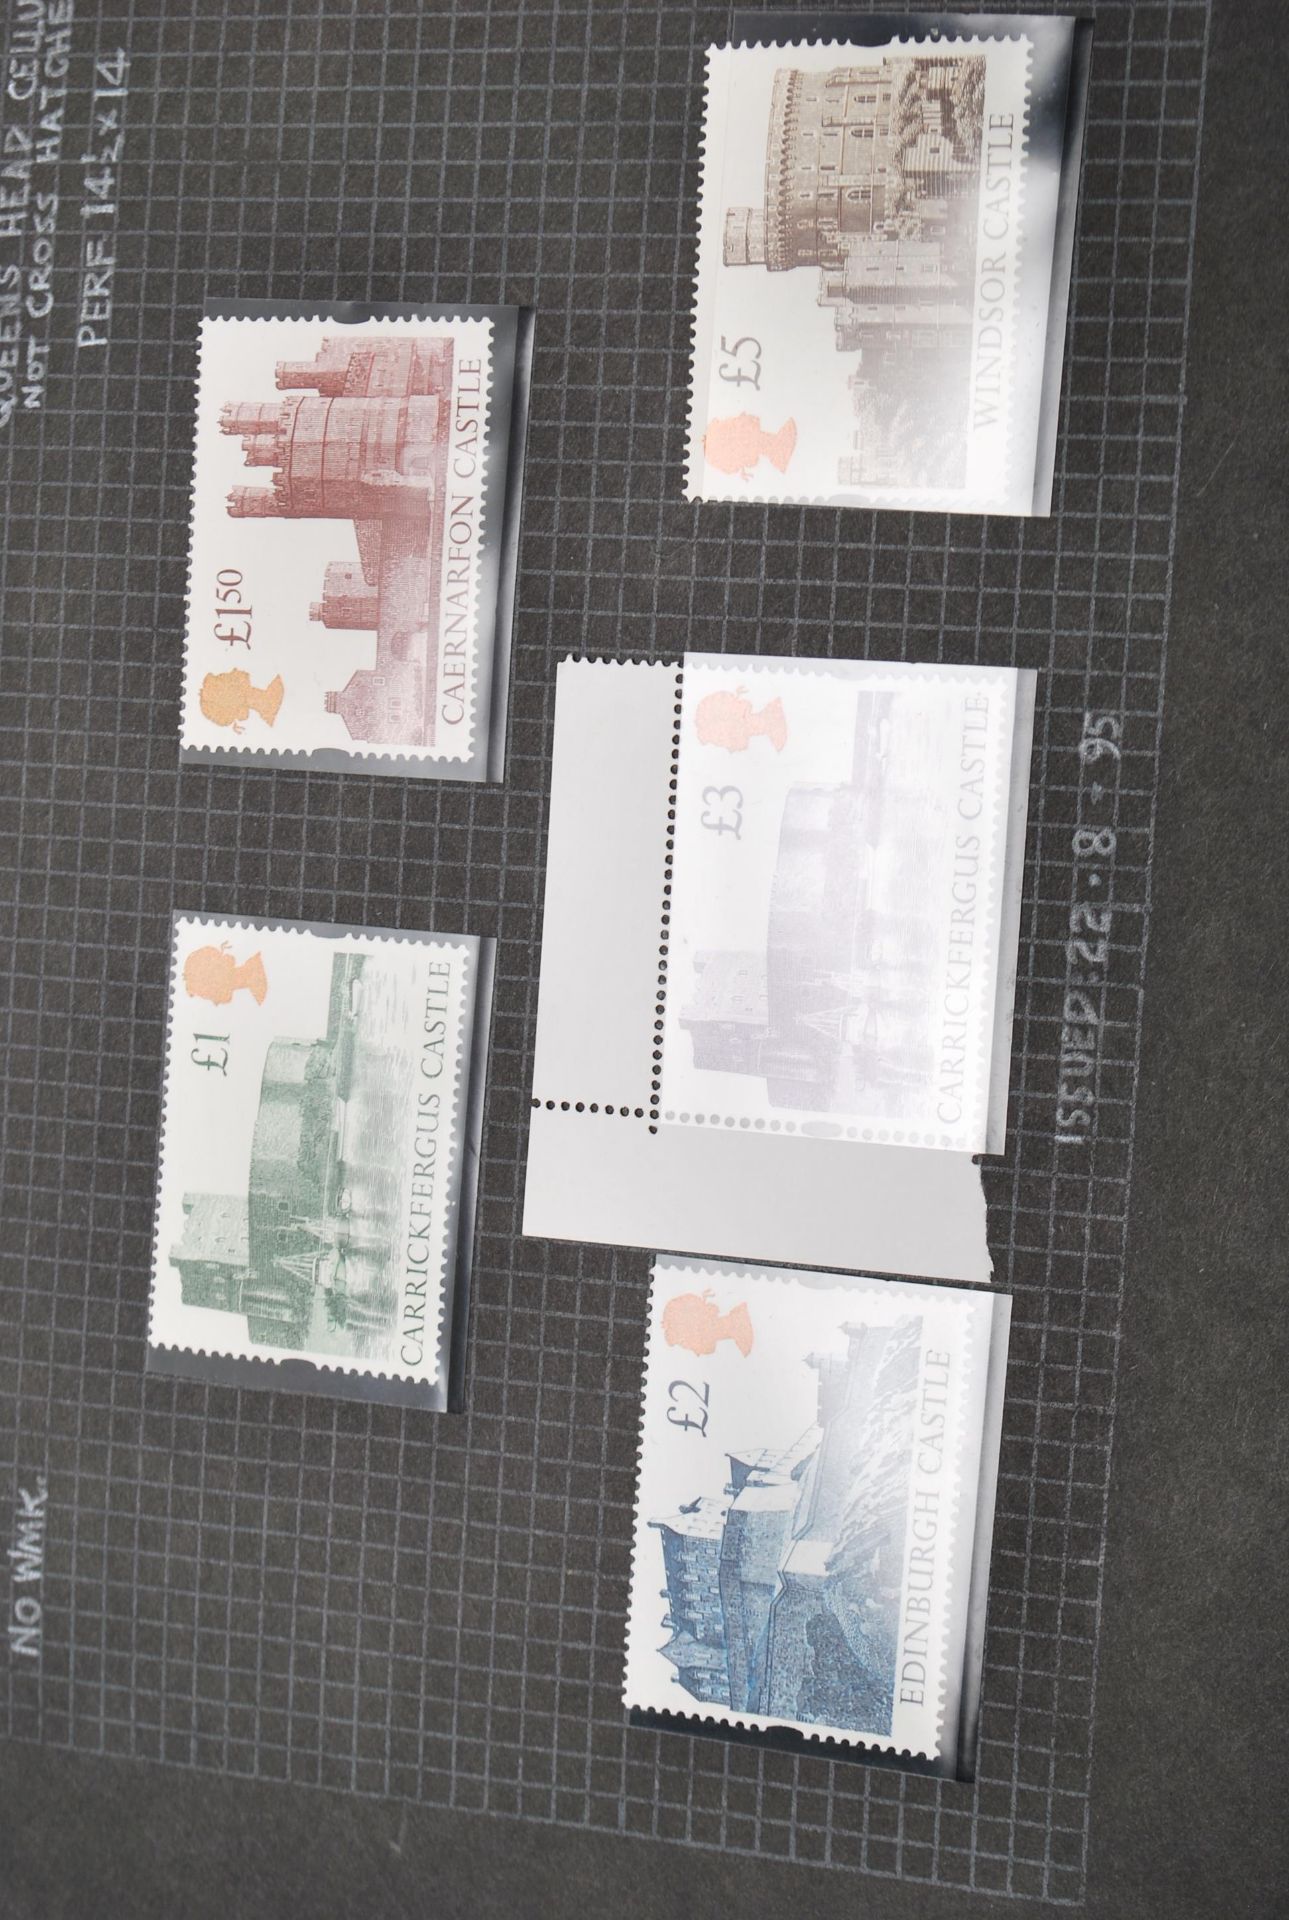 THREE ALBUMS OF MACHIN DEFINITIVE STAMPS + PRESENTATION - Image 11 of 25